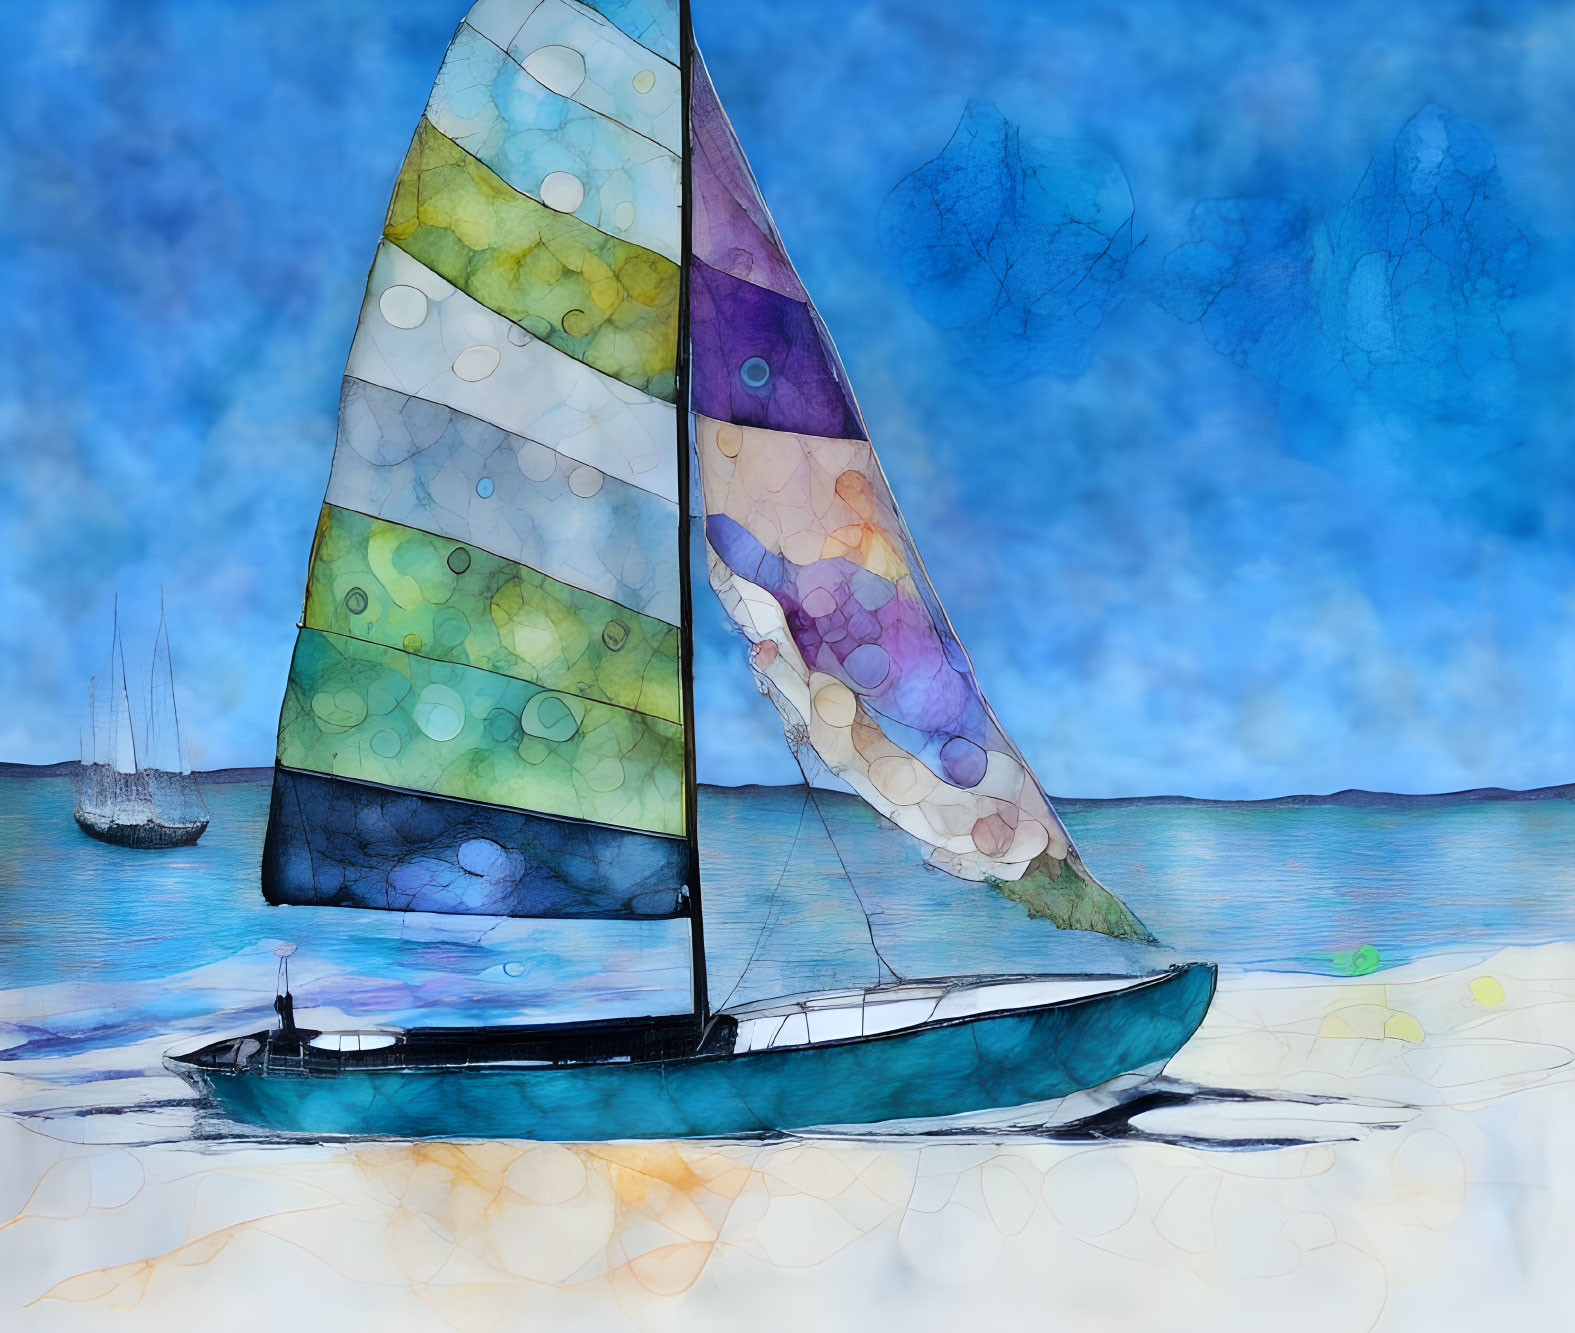 Colorful Abstract Sailboat Painting with Mosaic Sail on Blue Water